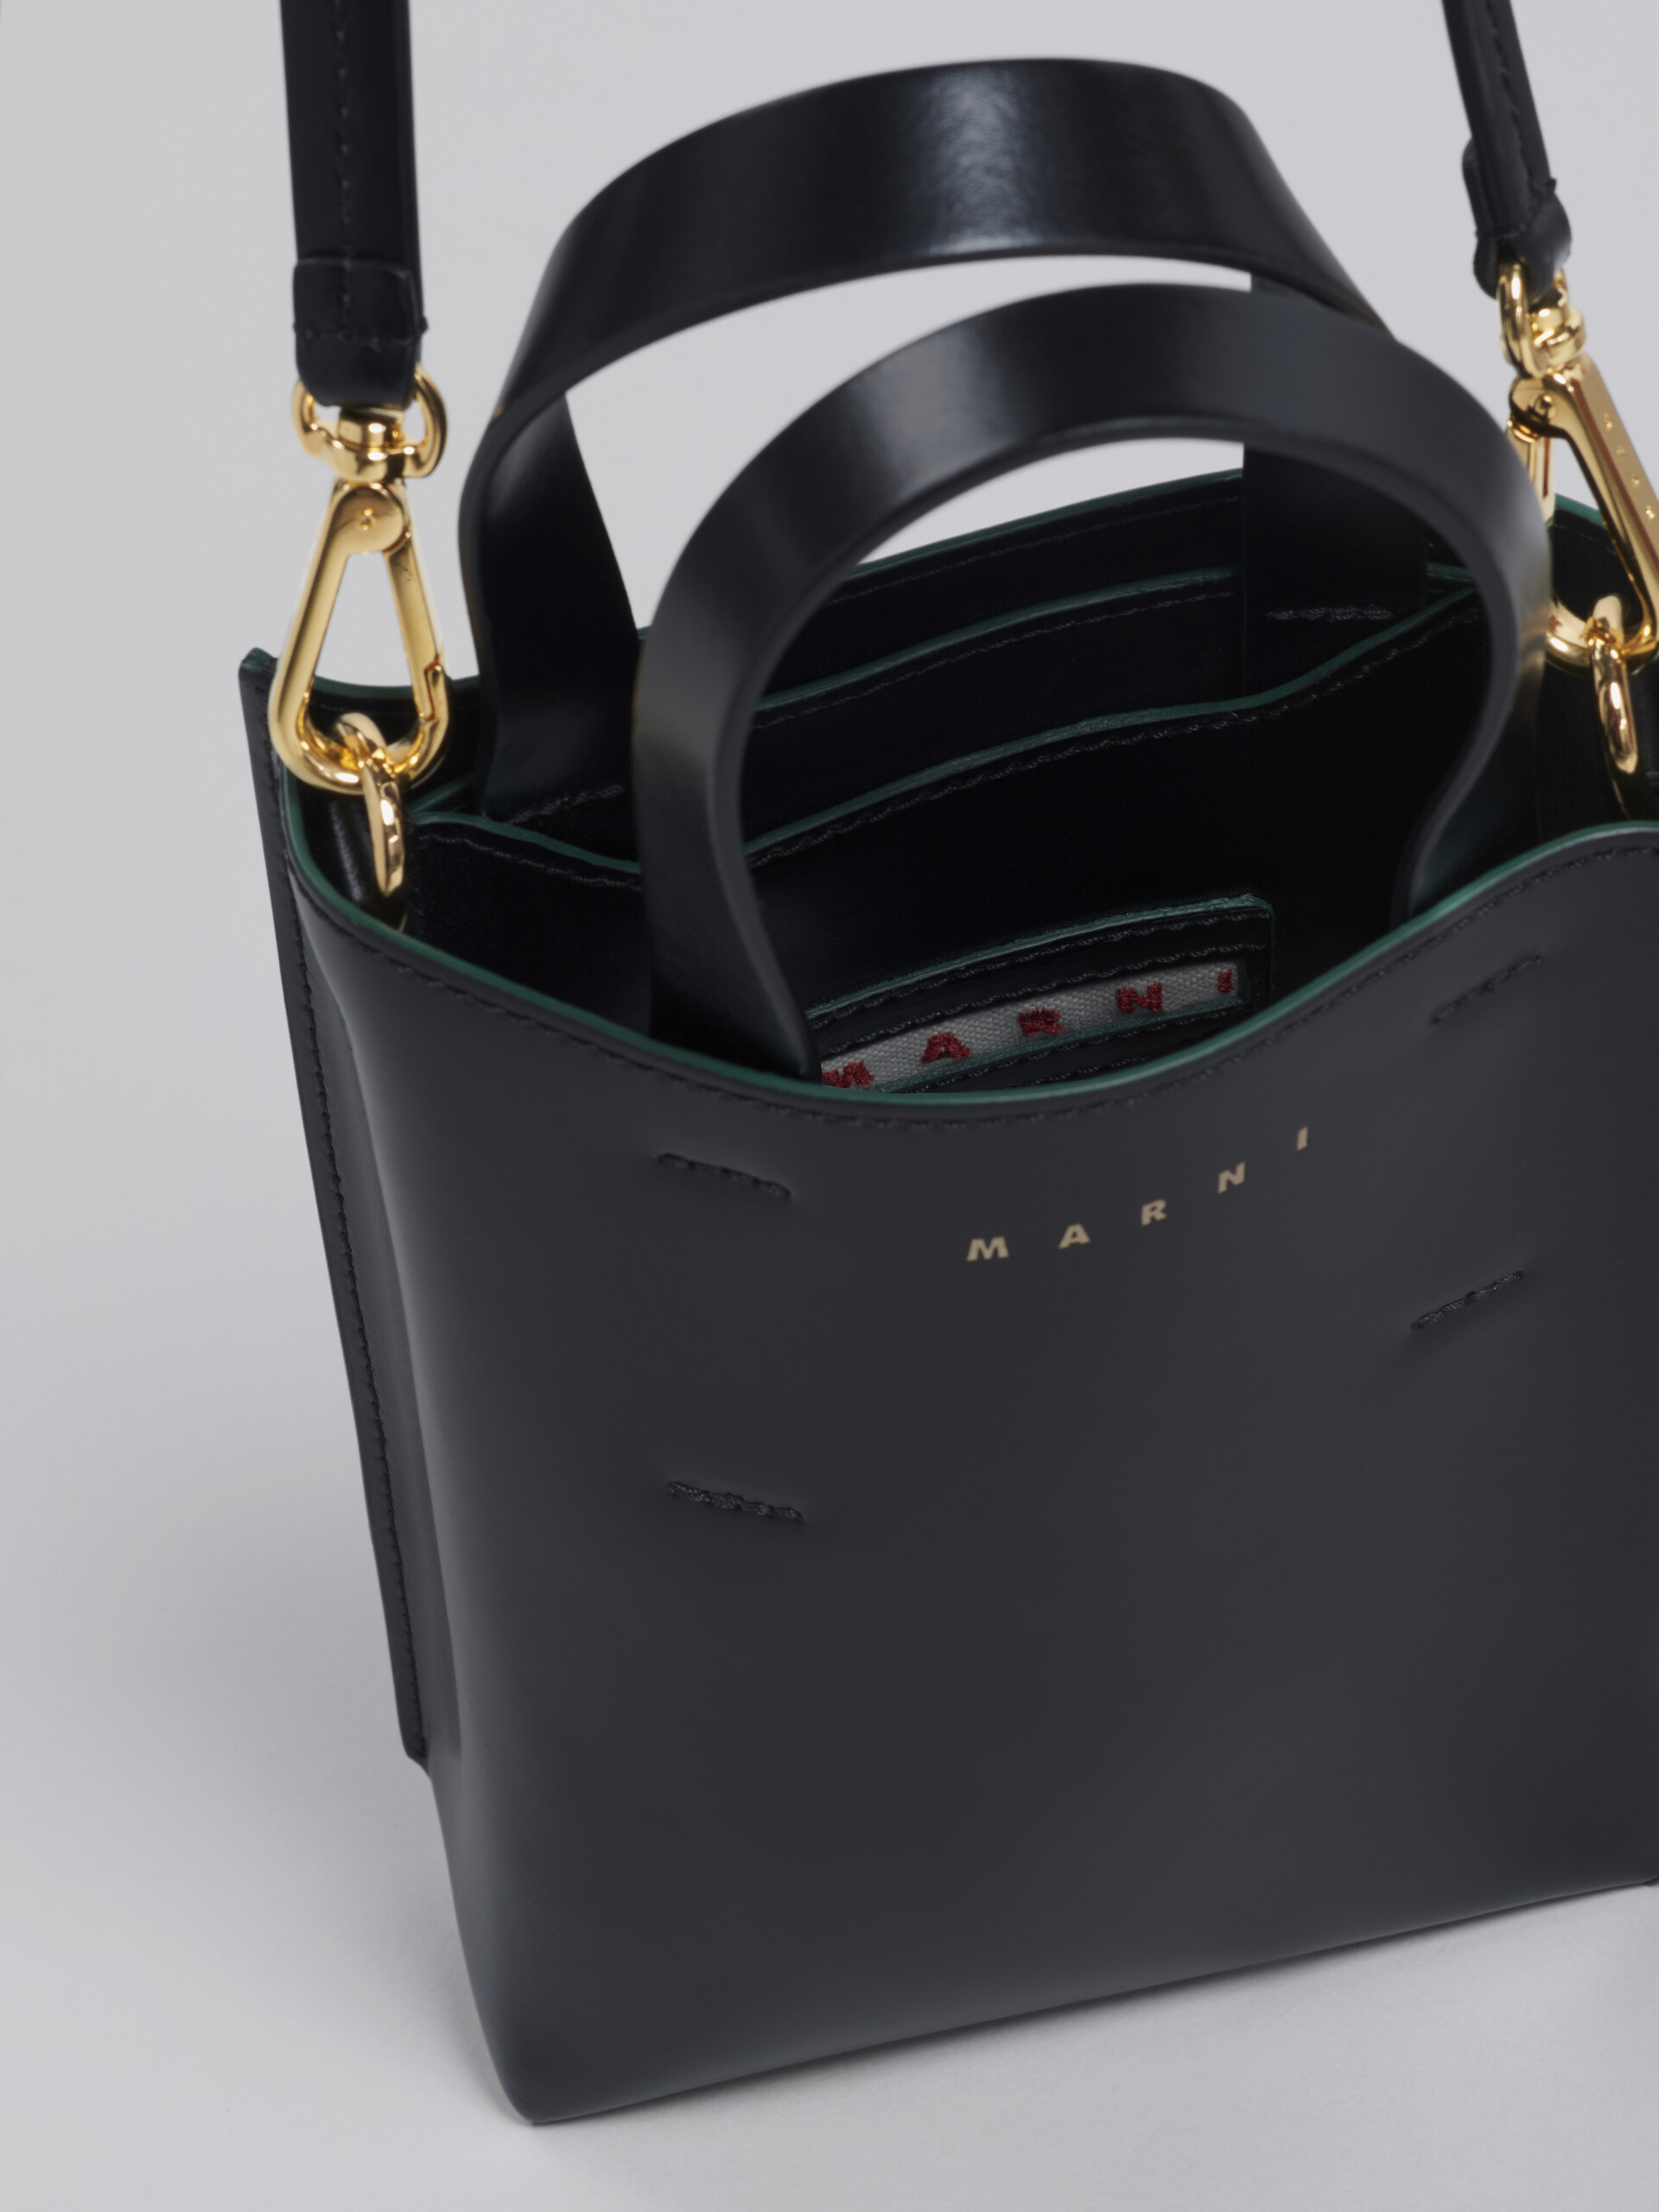 MUSEO nano bag in black shiny leather